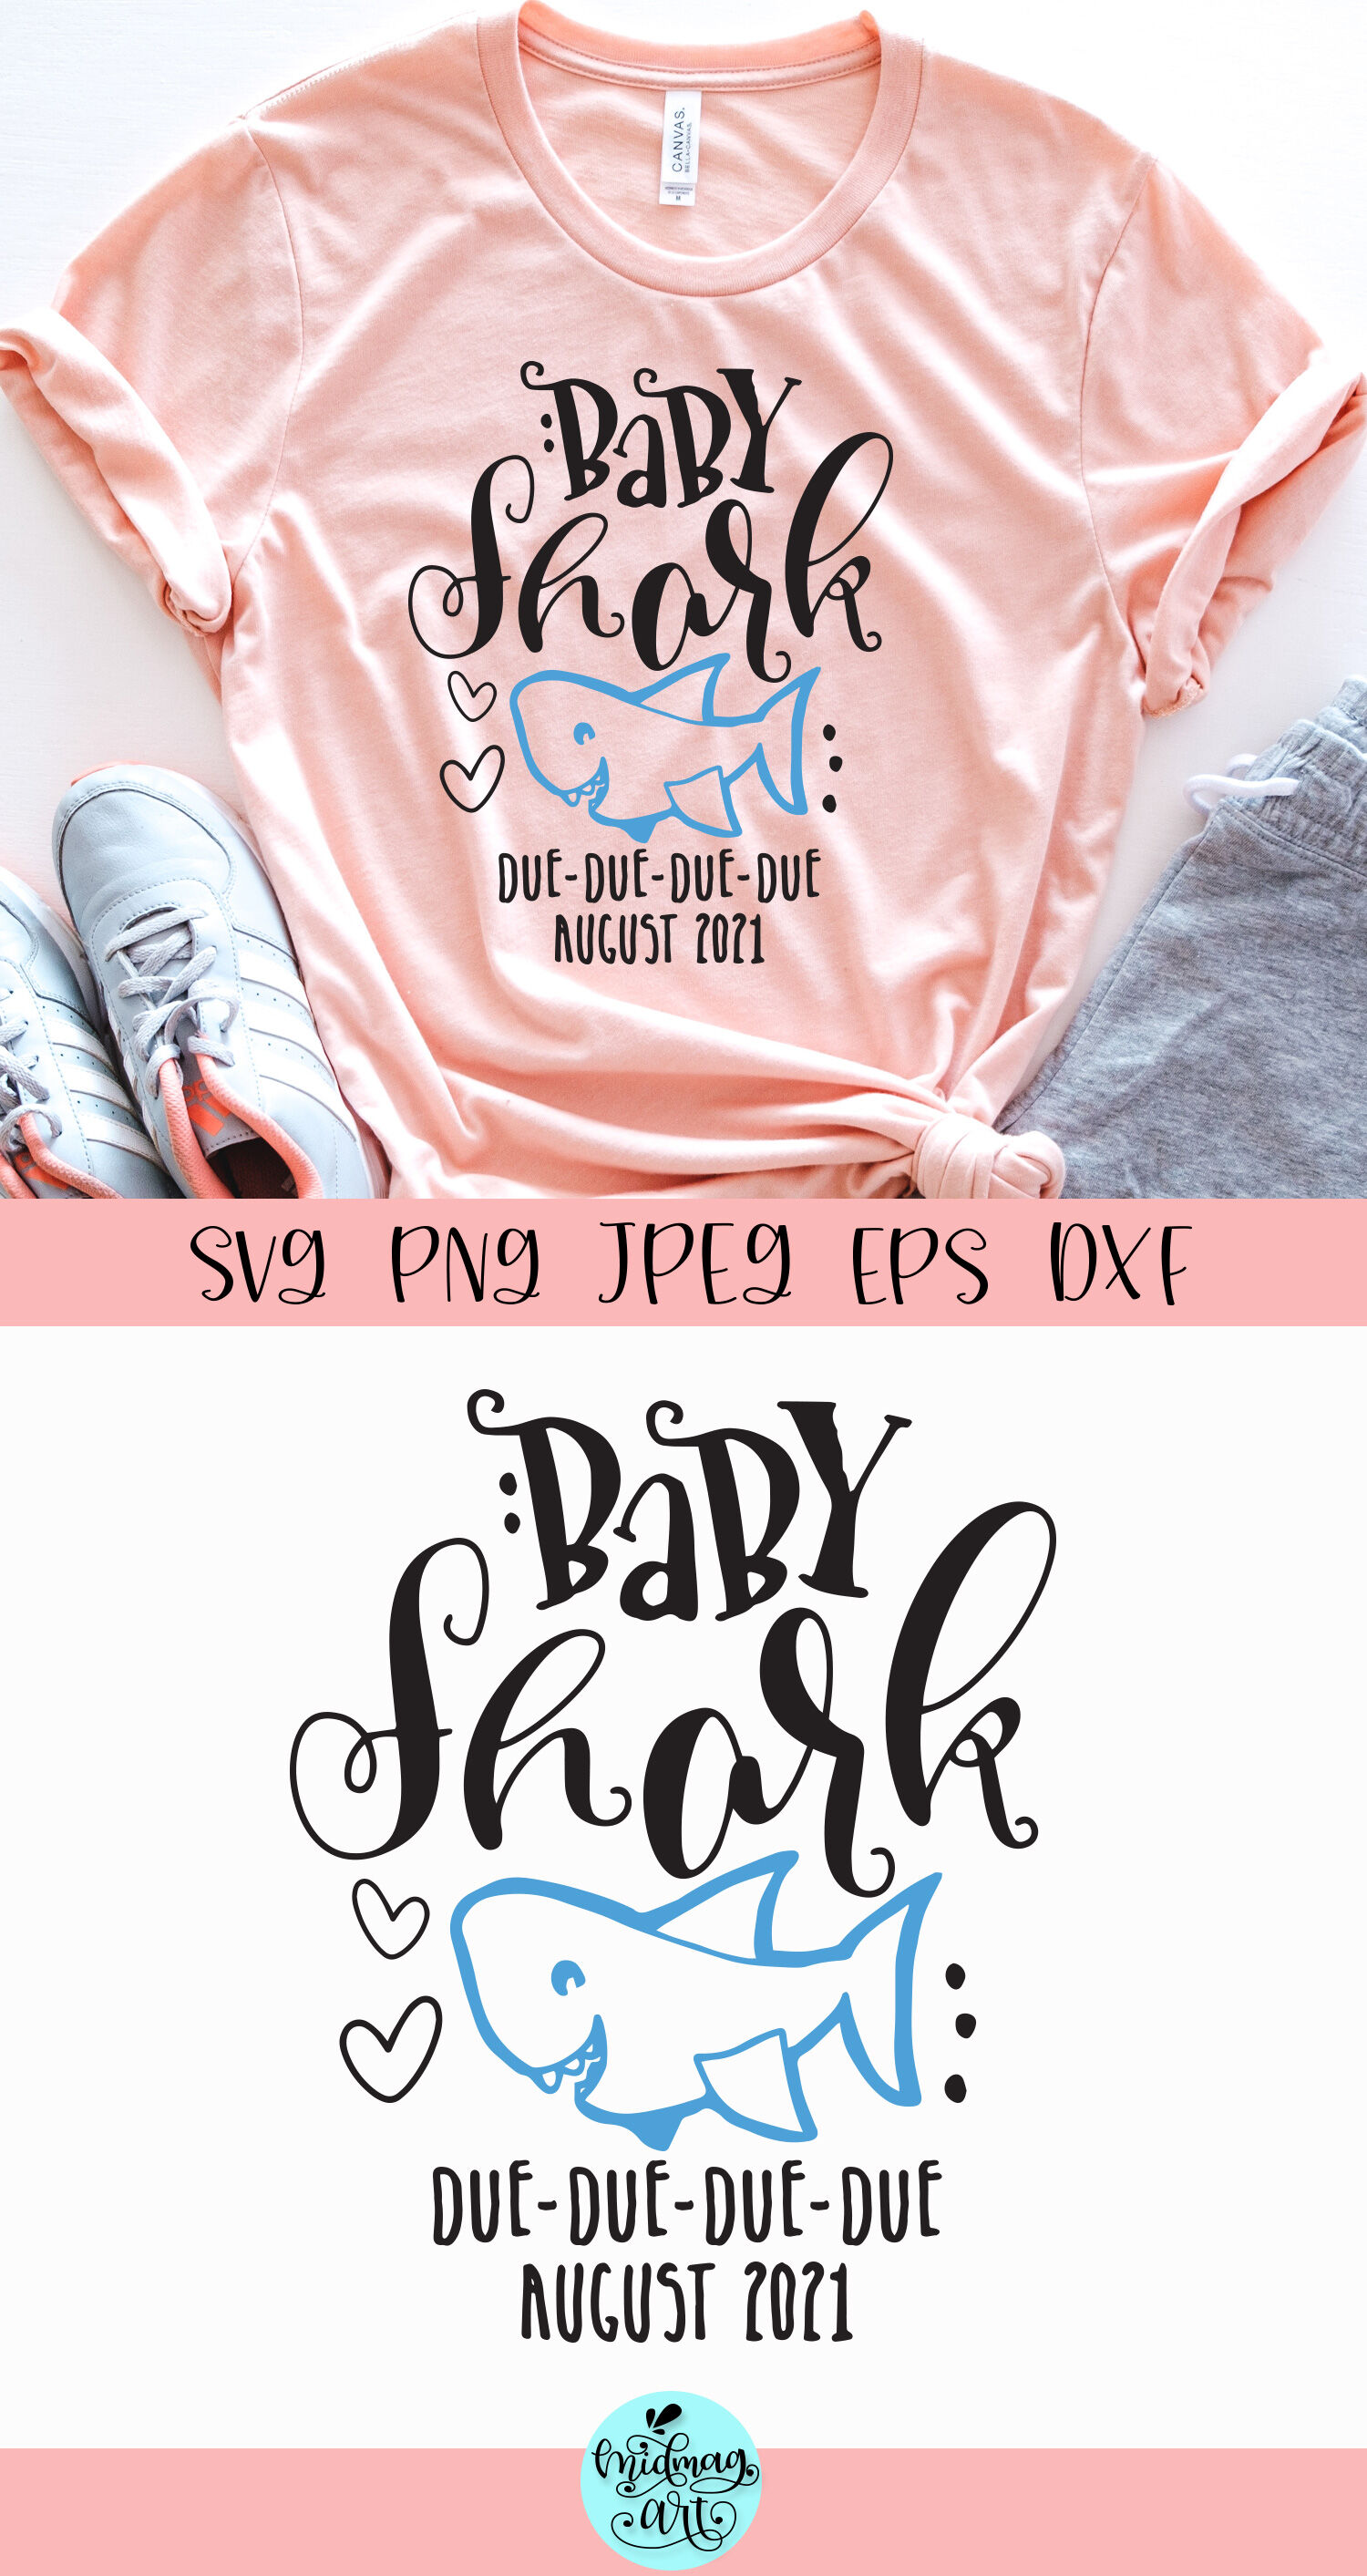 Download Baby shark due august 2021 svg, pregnancy svg By Midmagart | TheHungryJPEG.com